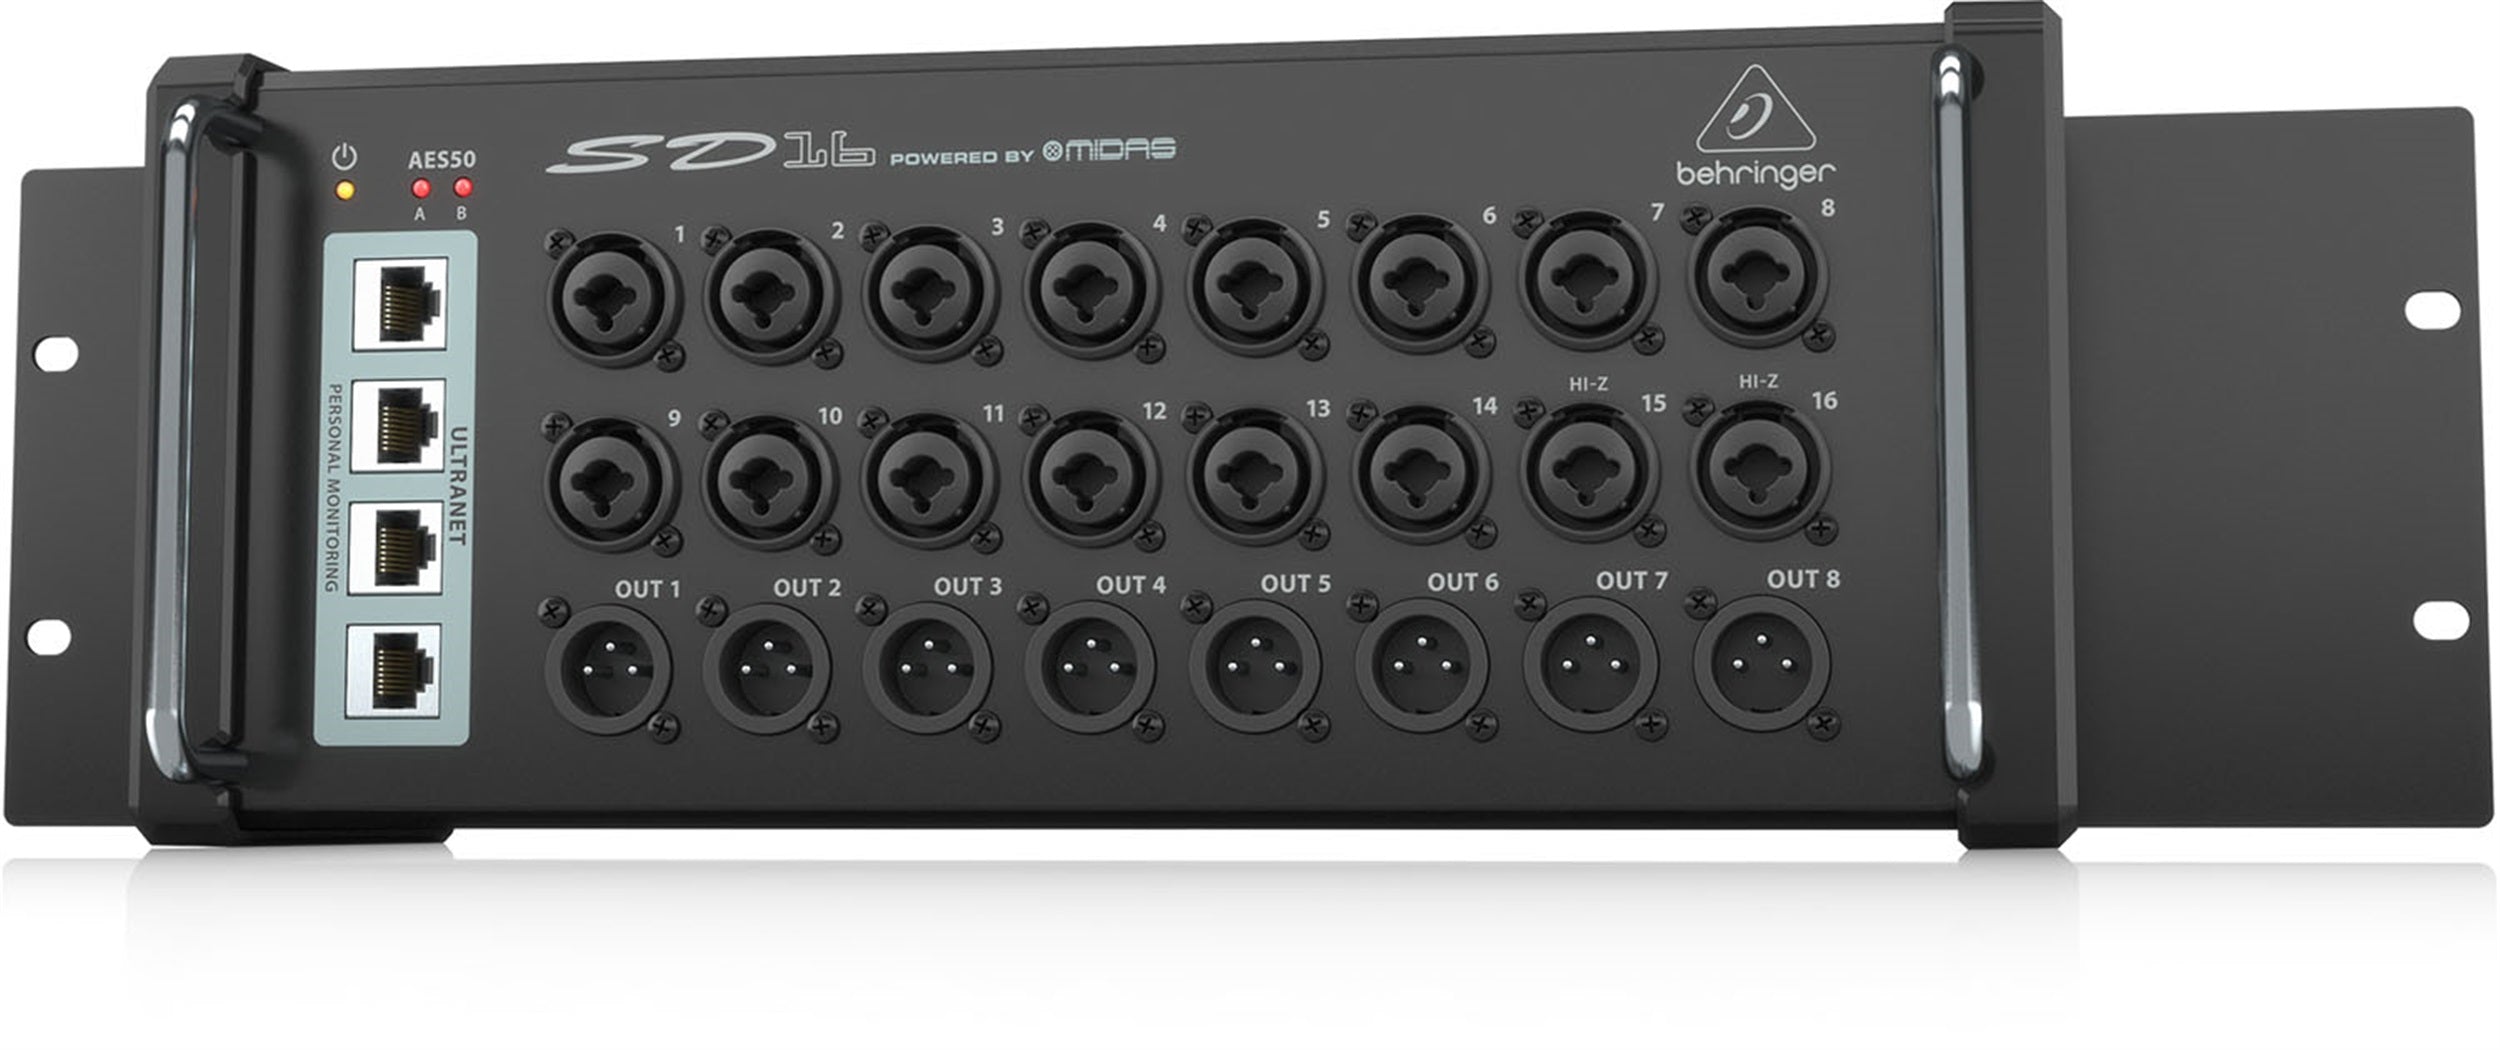 Behringer SD16, 8 Outputs Stage Box with 16 Remote-Controllable Midas Preamps by Behringer